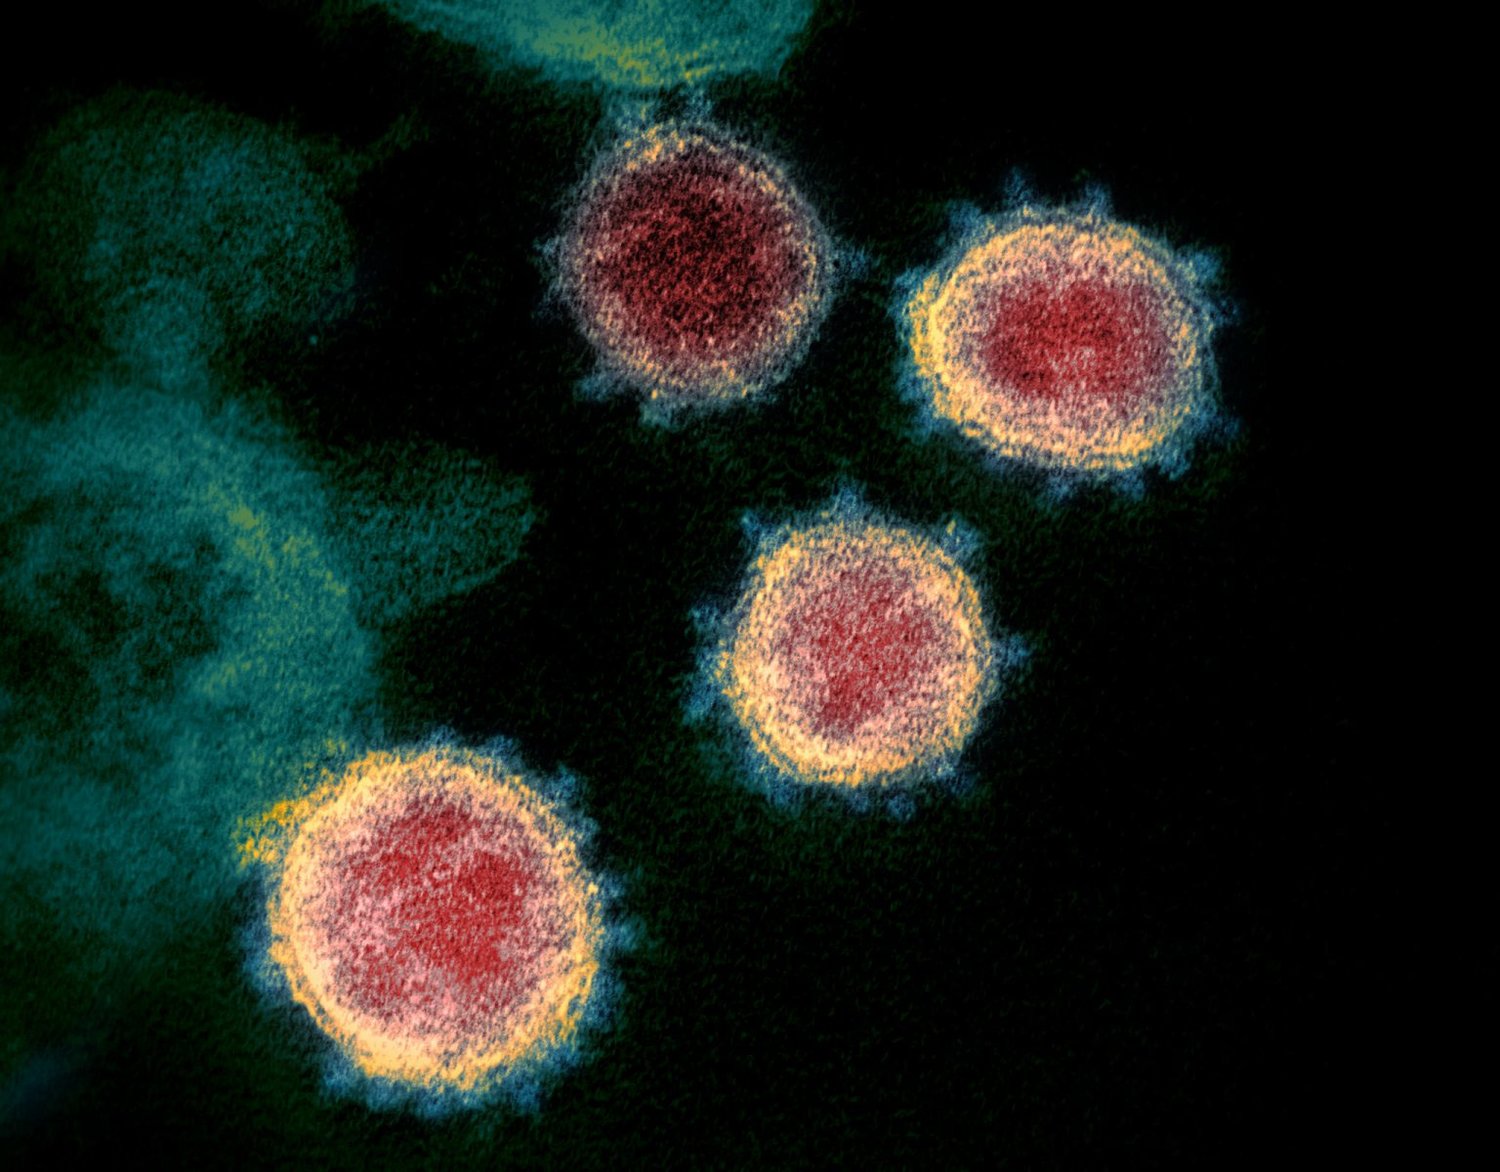 This is a new image of the novel coronavirus that causes COVID-19. The virus is now creating mutations that are spreading in the United States and elsewhere. Credit: National Institute of Allergy and Infectious Diseases, Rocky Mountain Lab